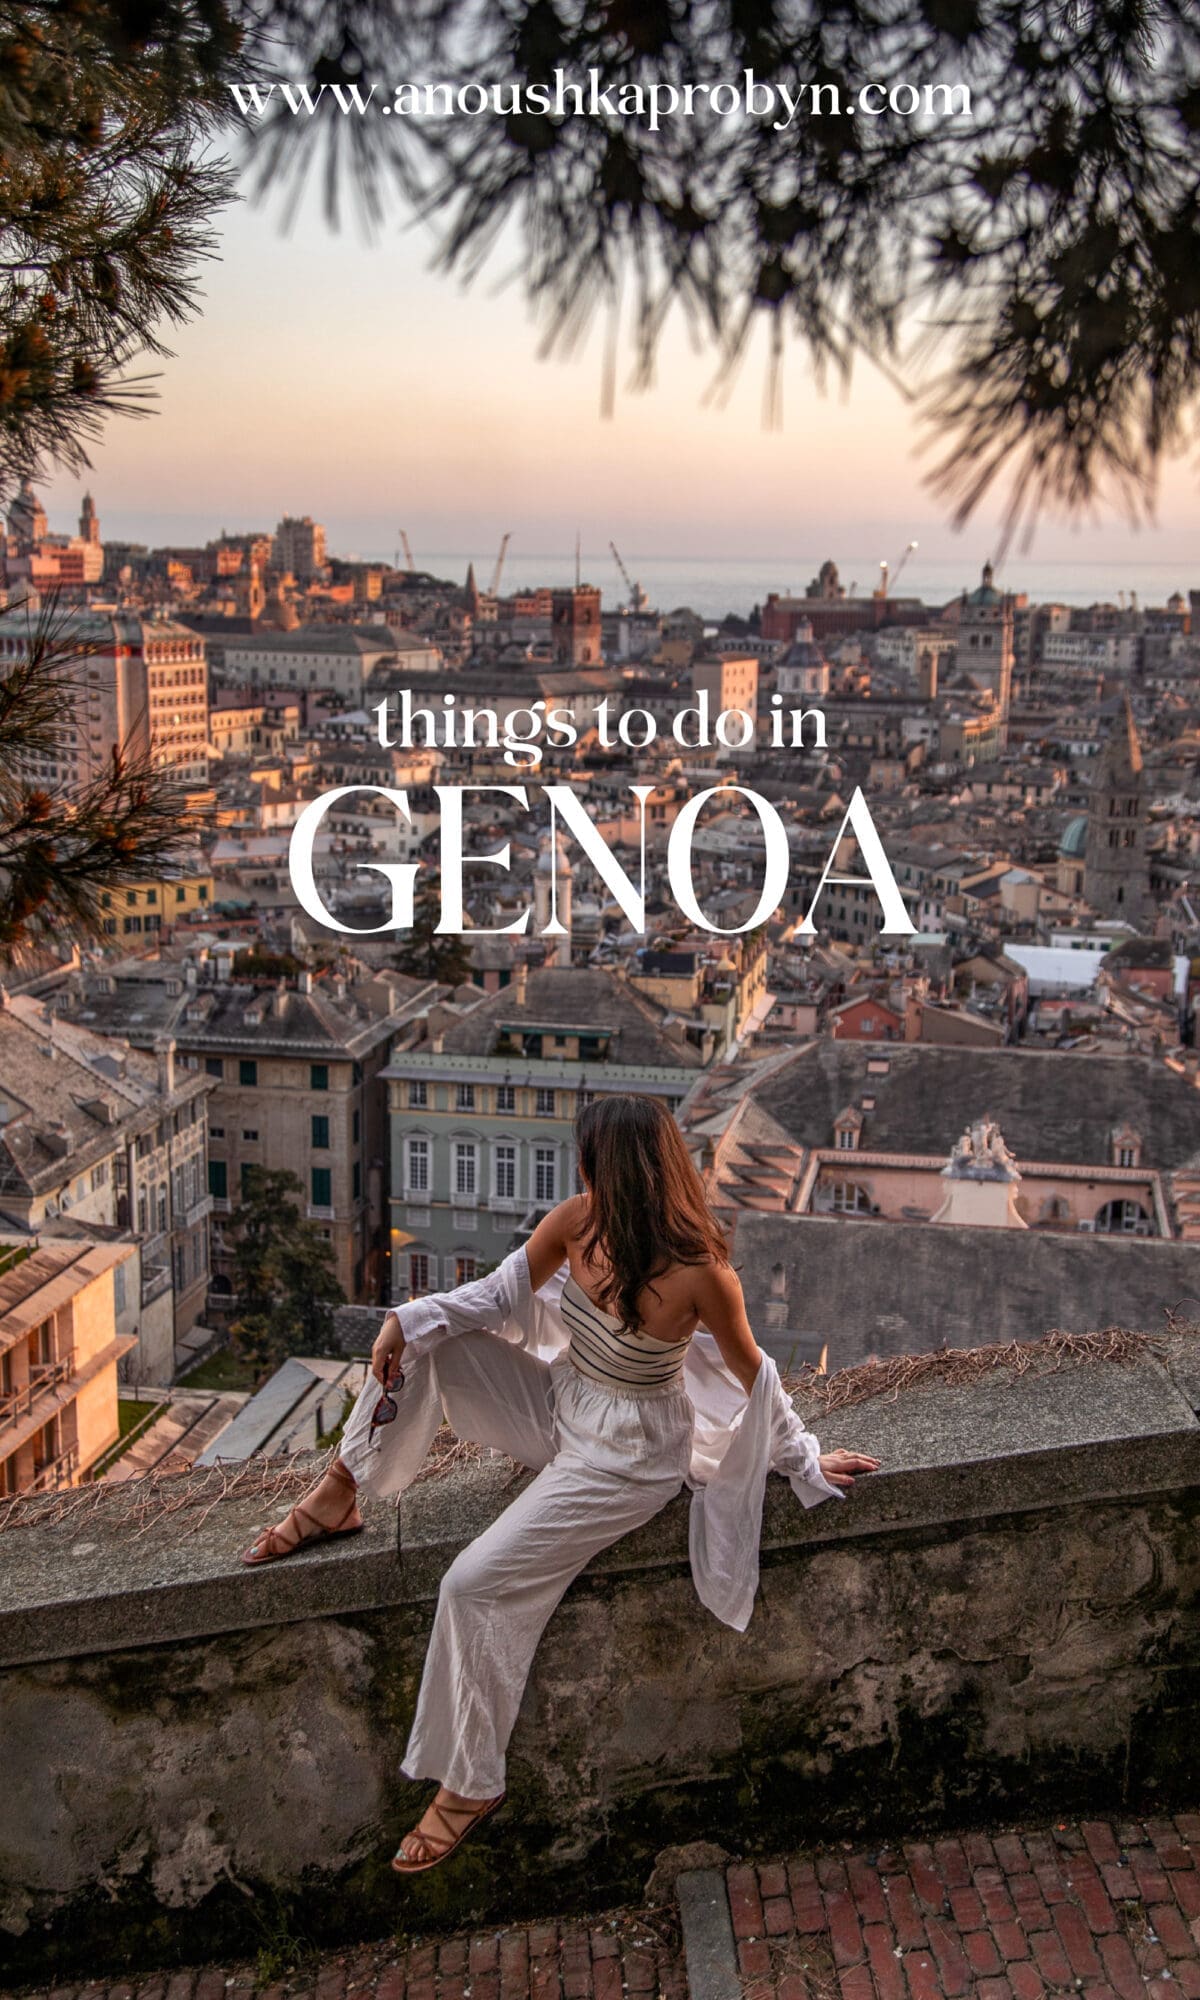 Things to do in Genoa Travel Guide, UK Travel Blogger